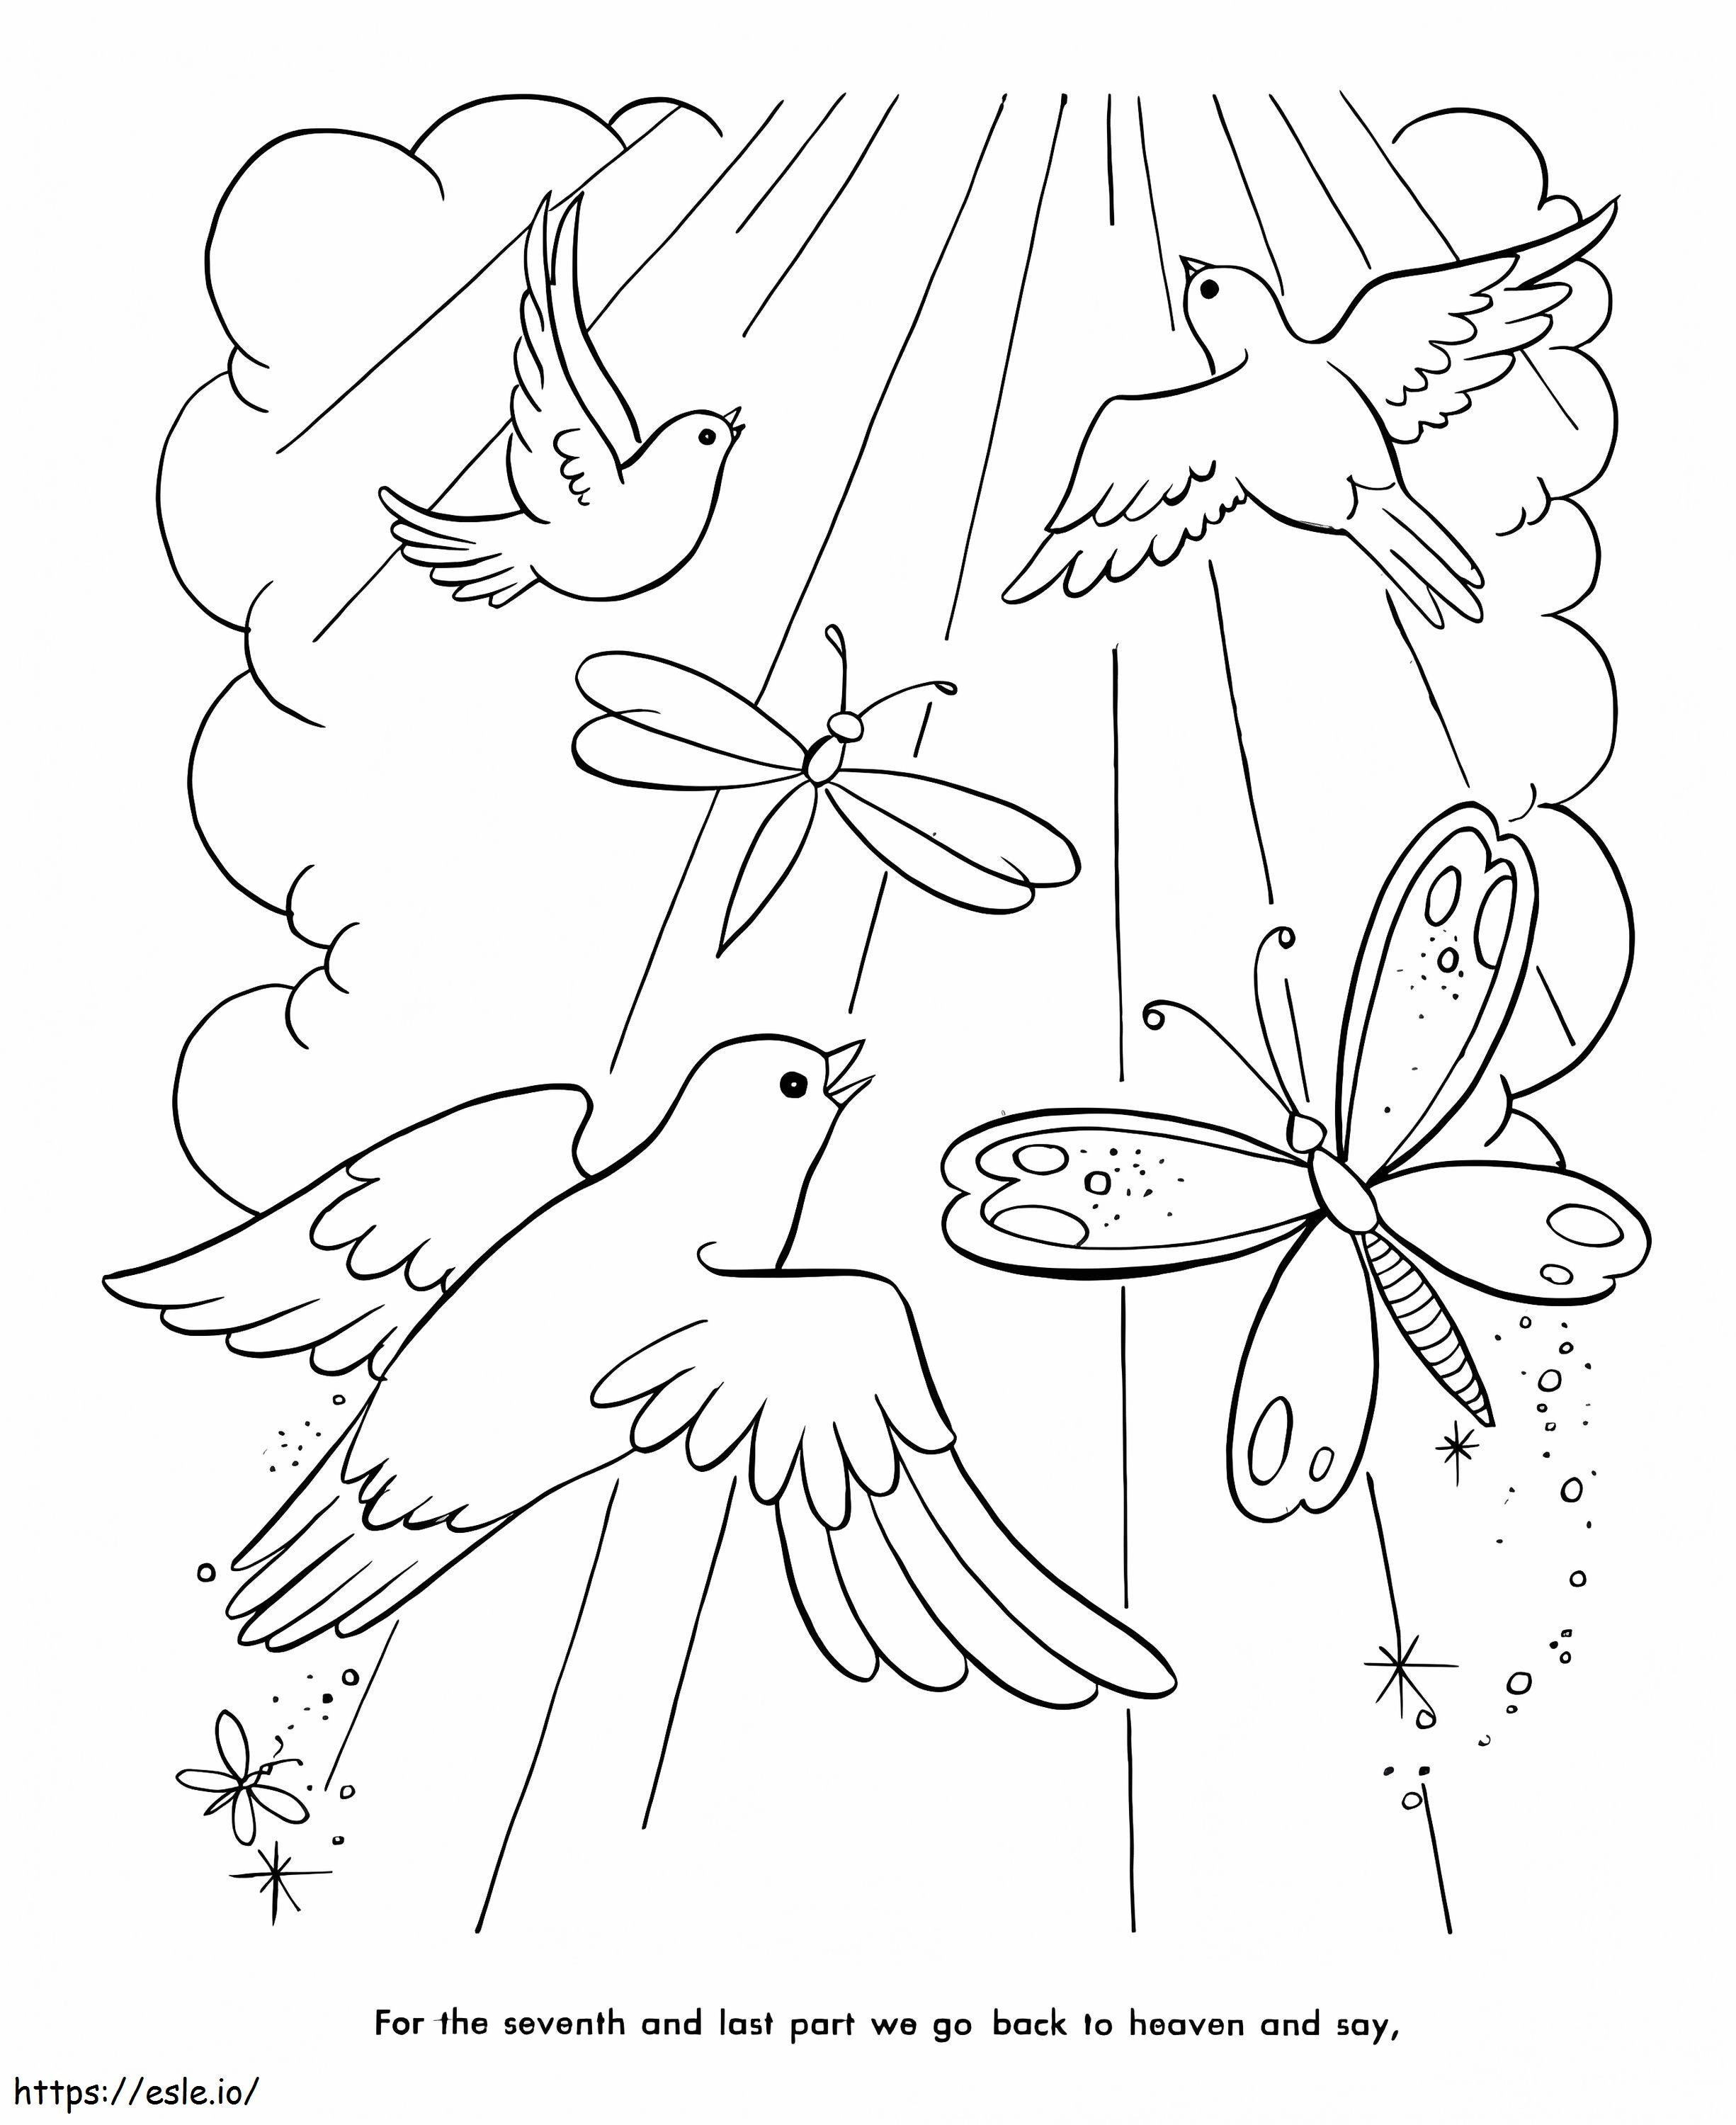 Lords Prayer coloring page